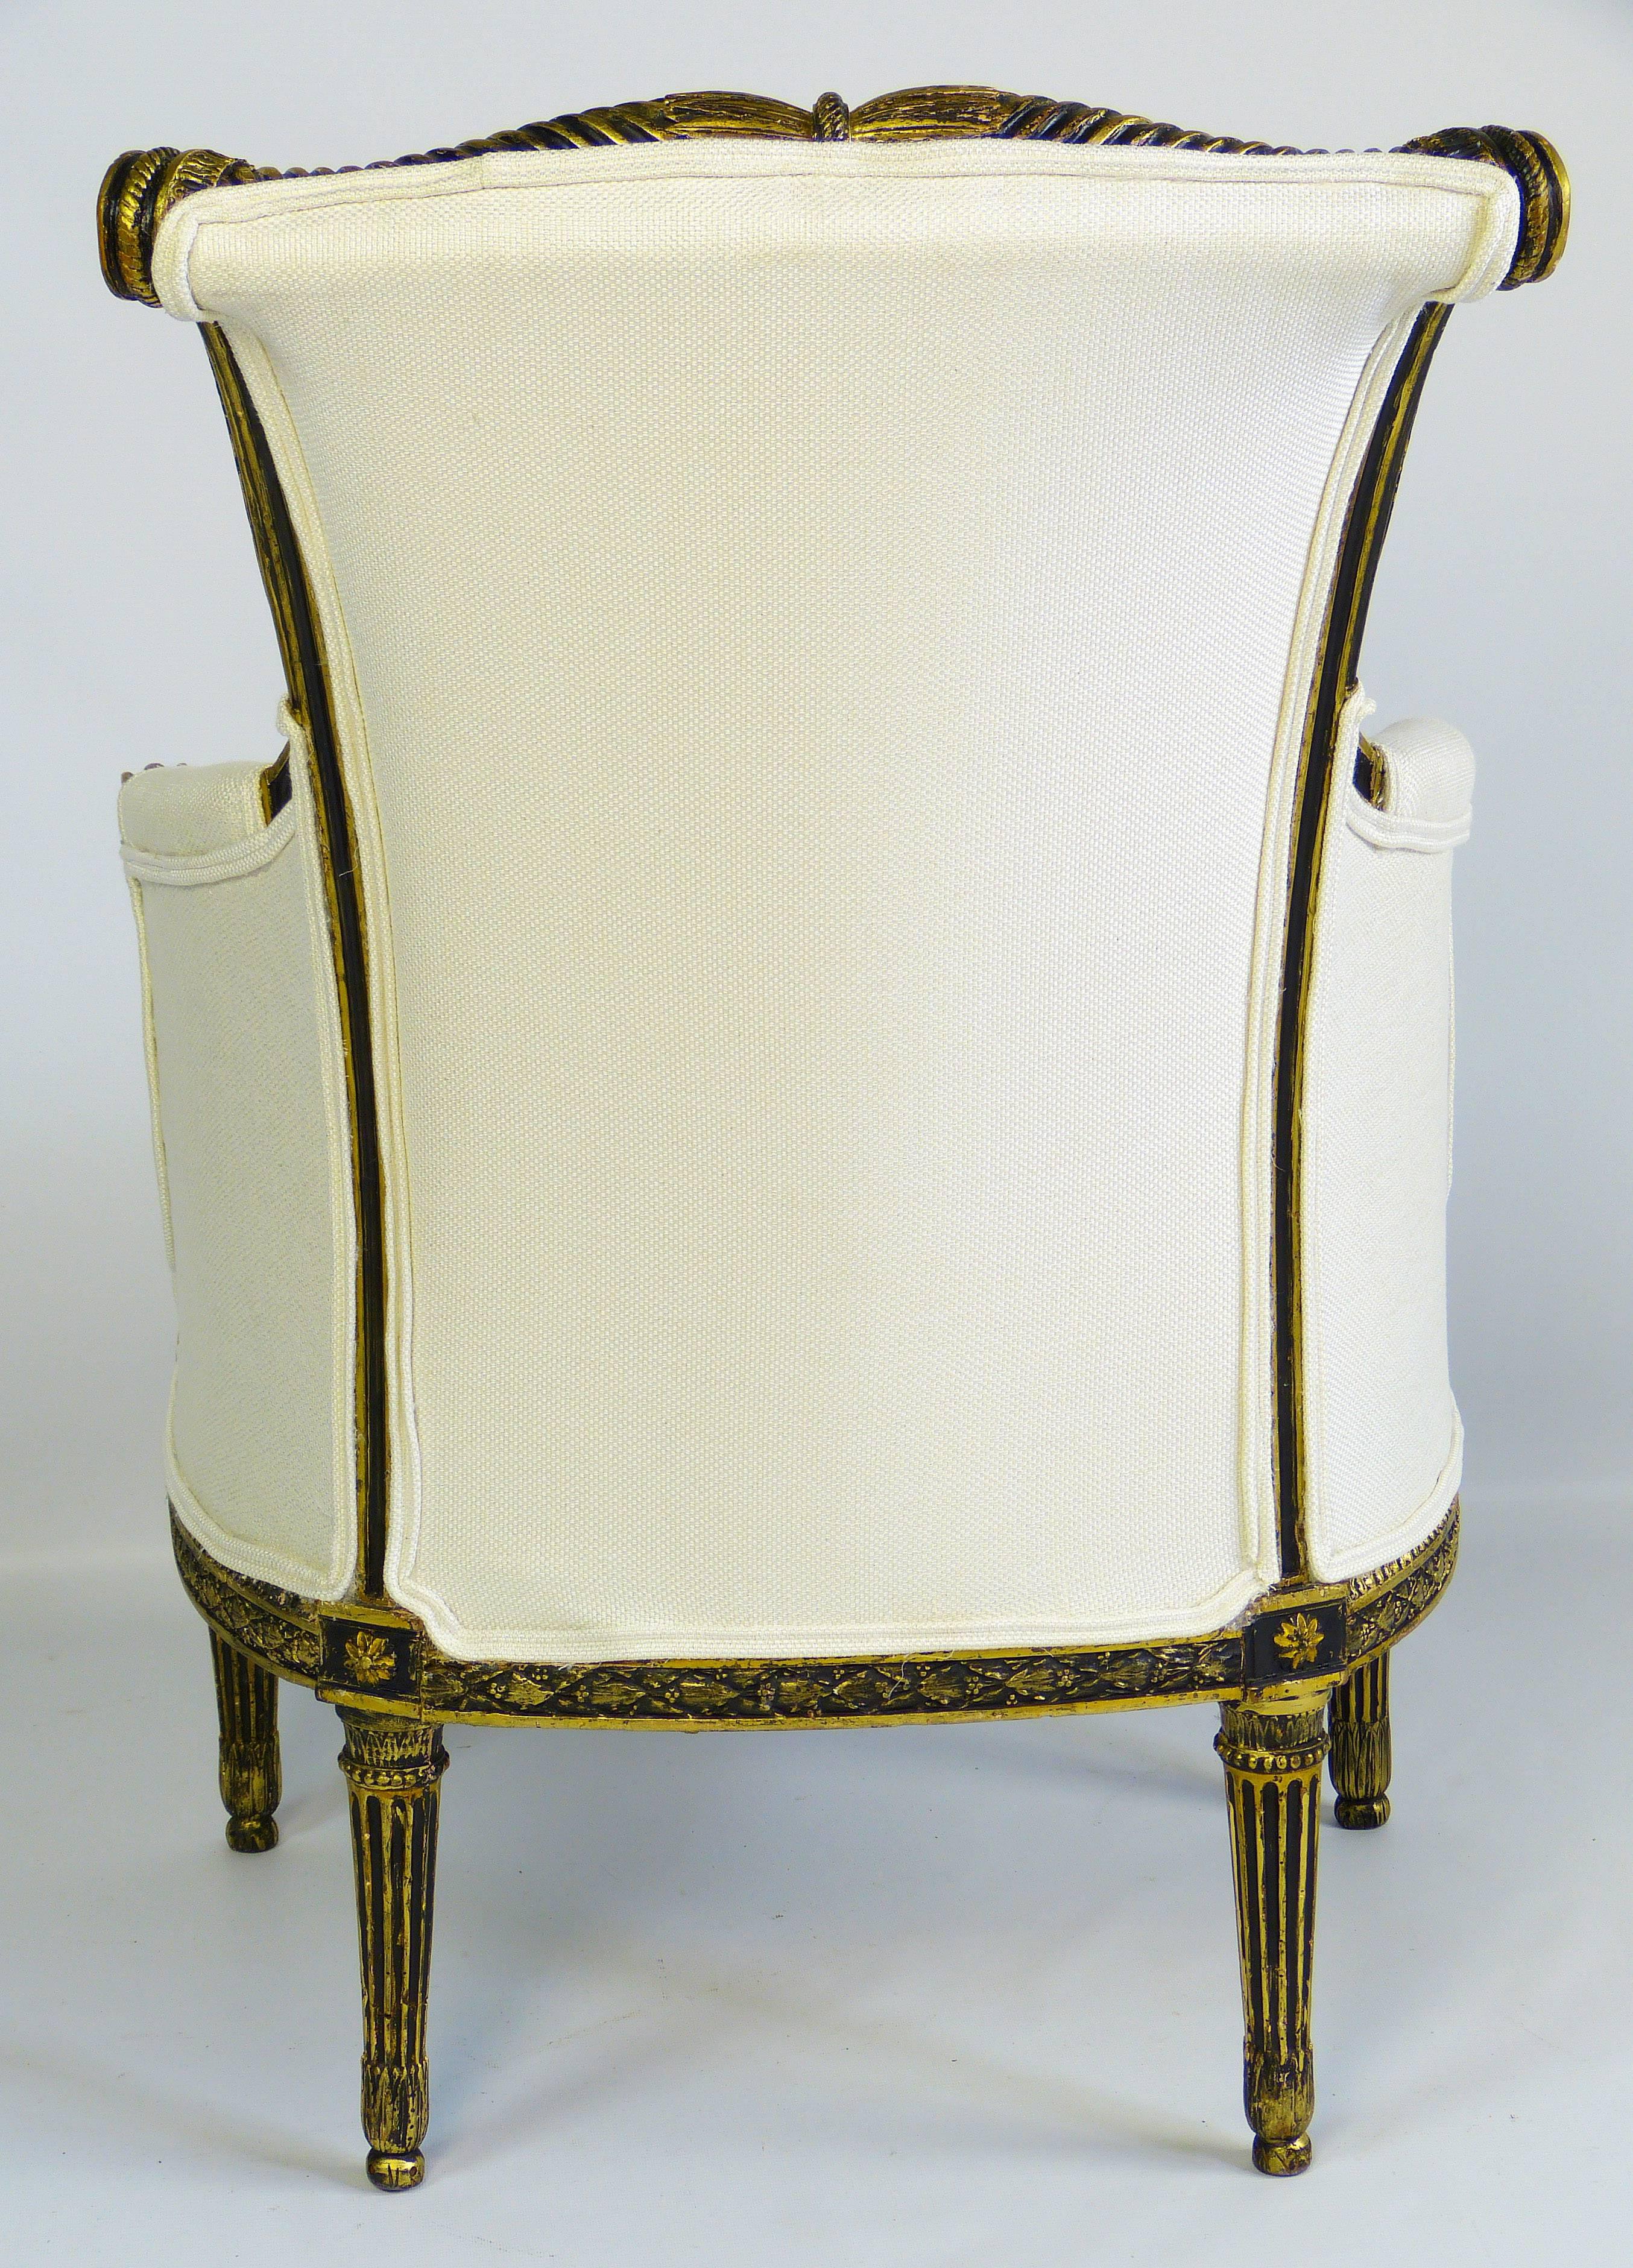 Beech Armchair French Fauteuil 18th Century Louis XVI  by FC Menant